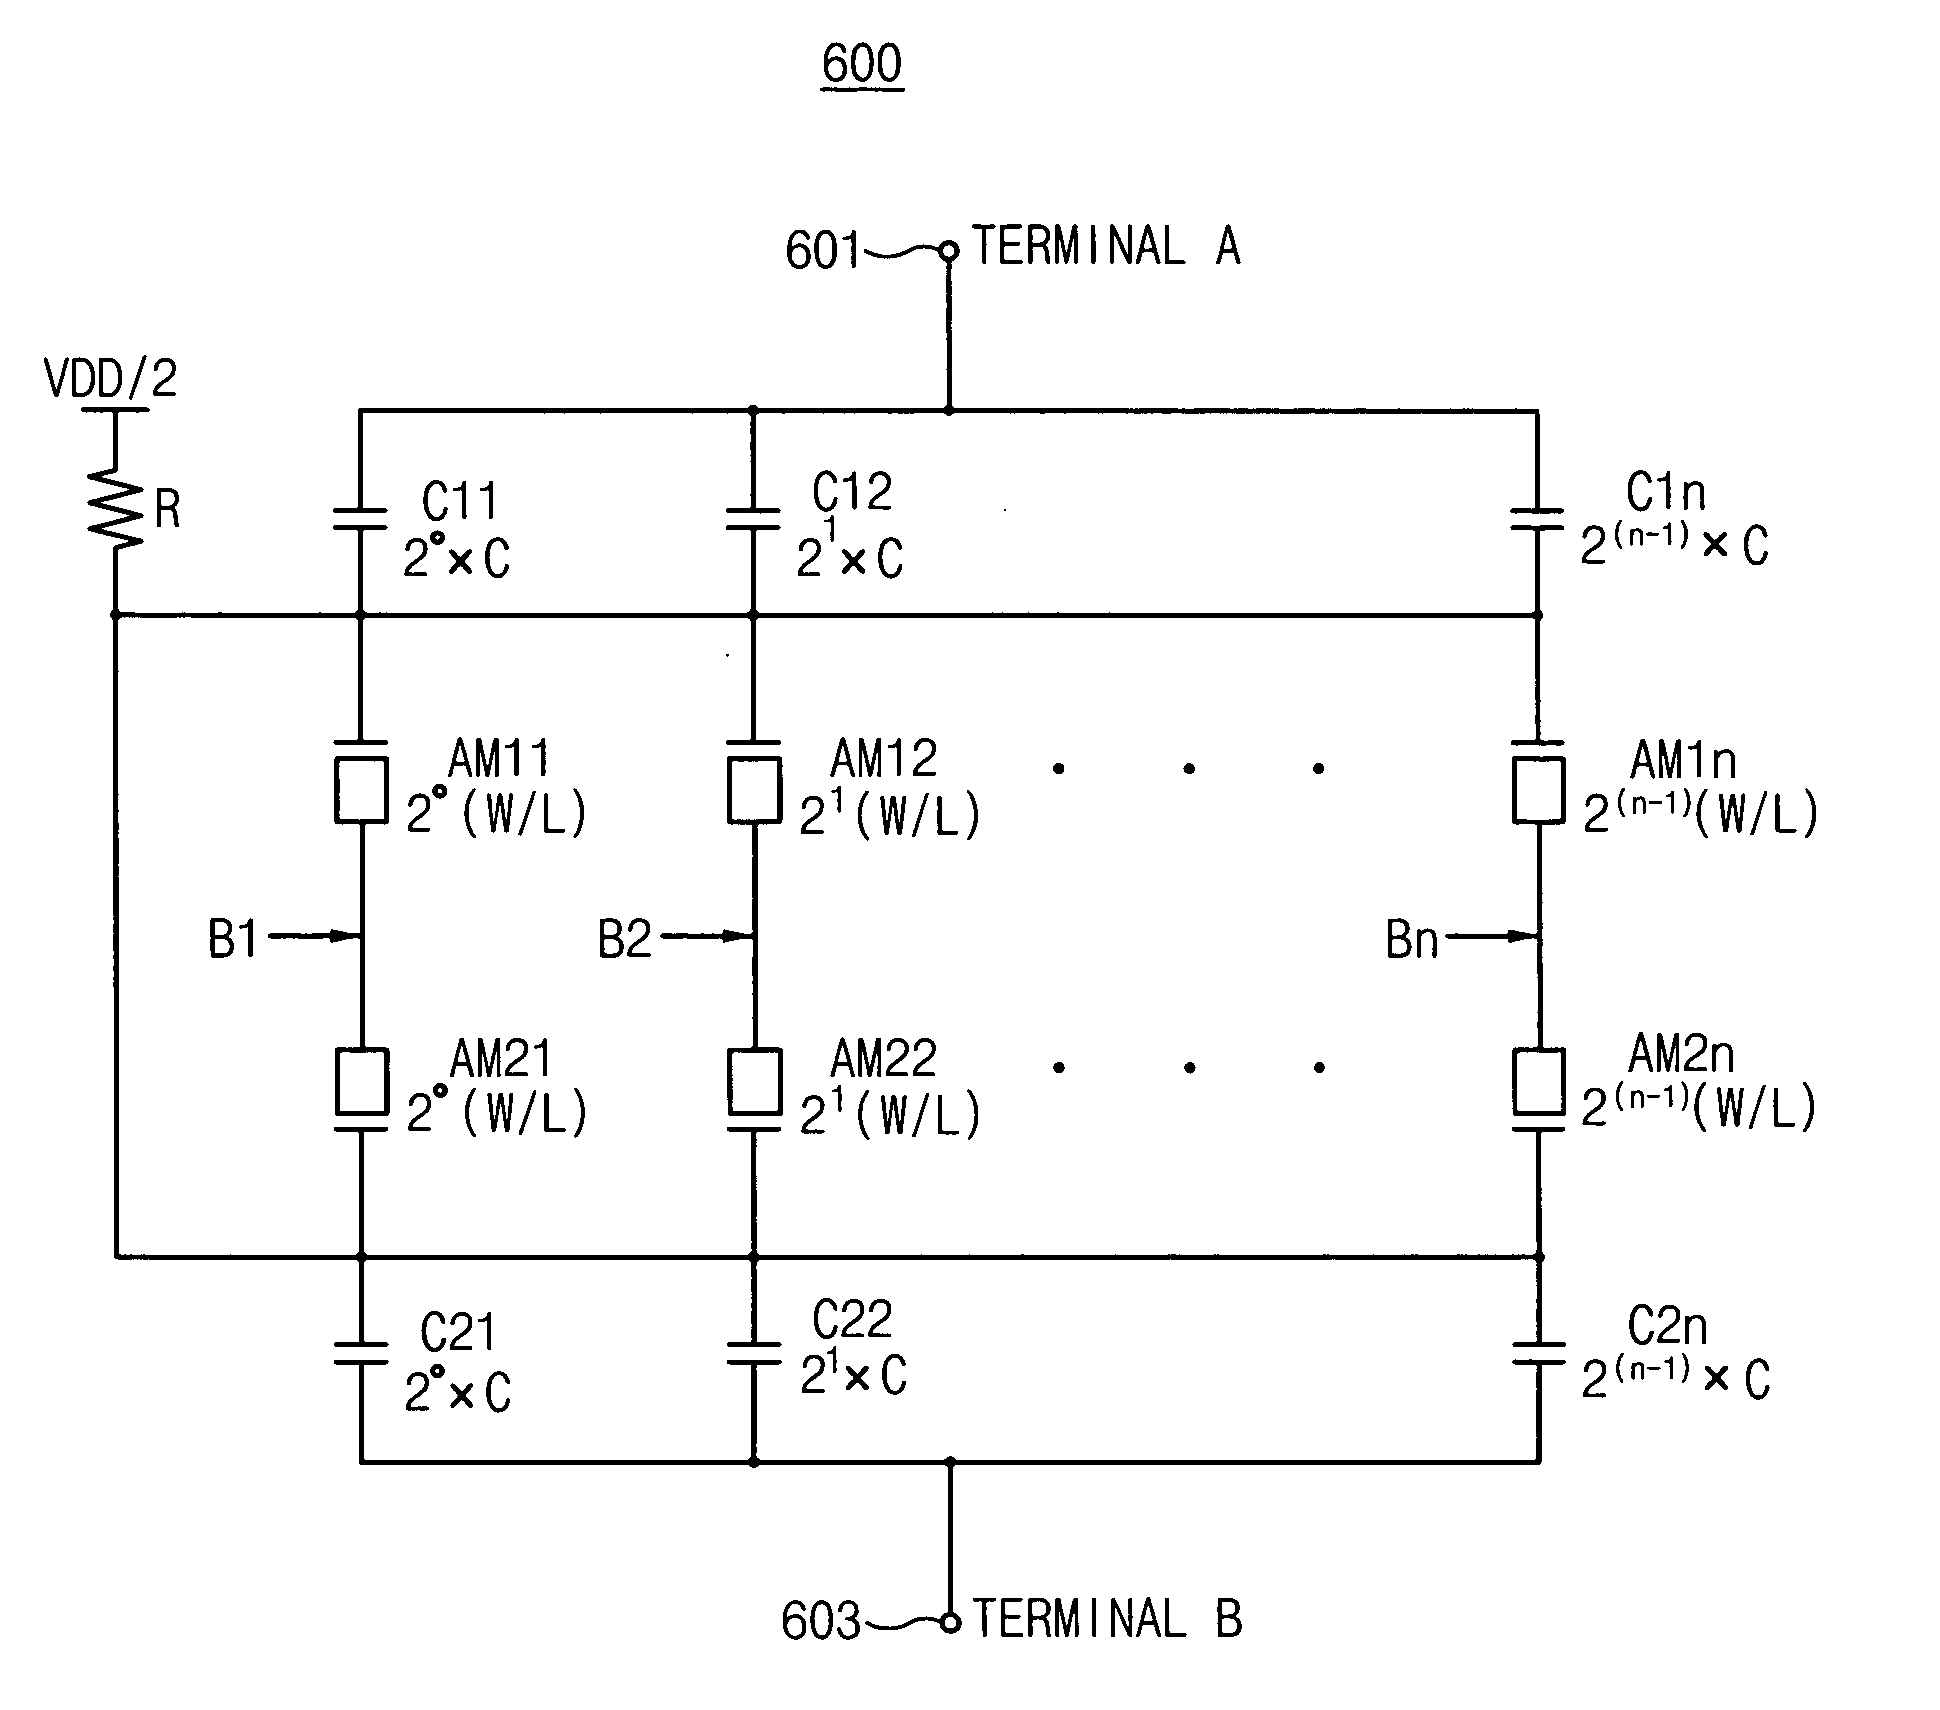 Capacitor bank and voltage controlled oscillator having the same